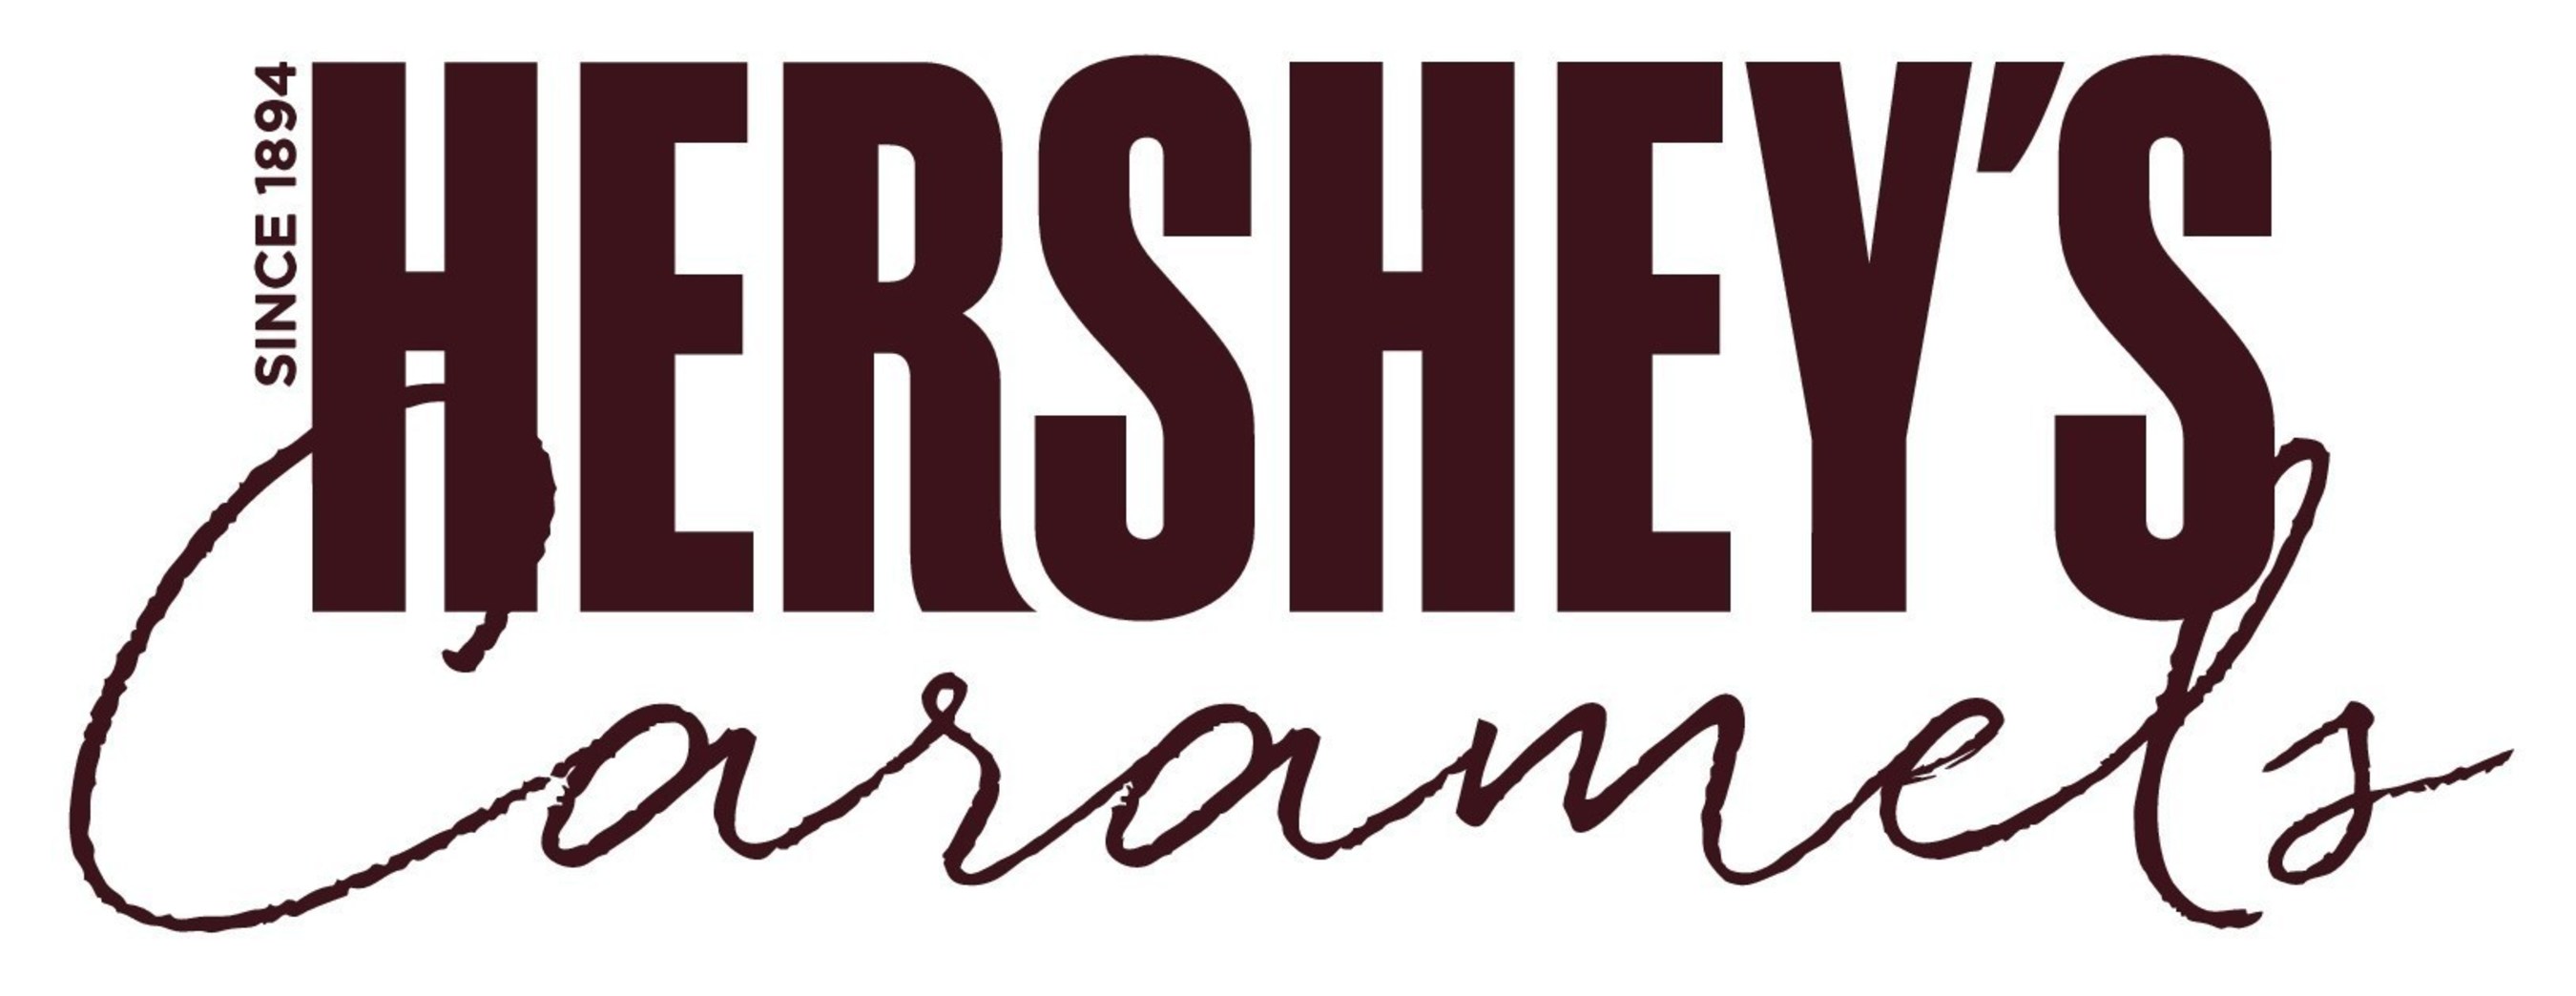 HERSHEY'S Caramels